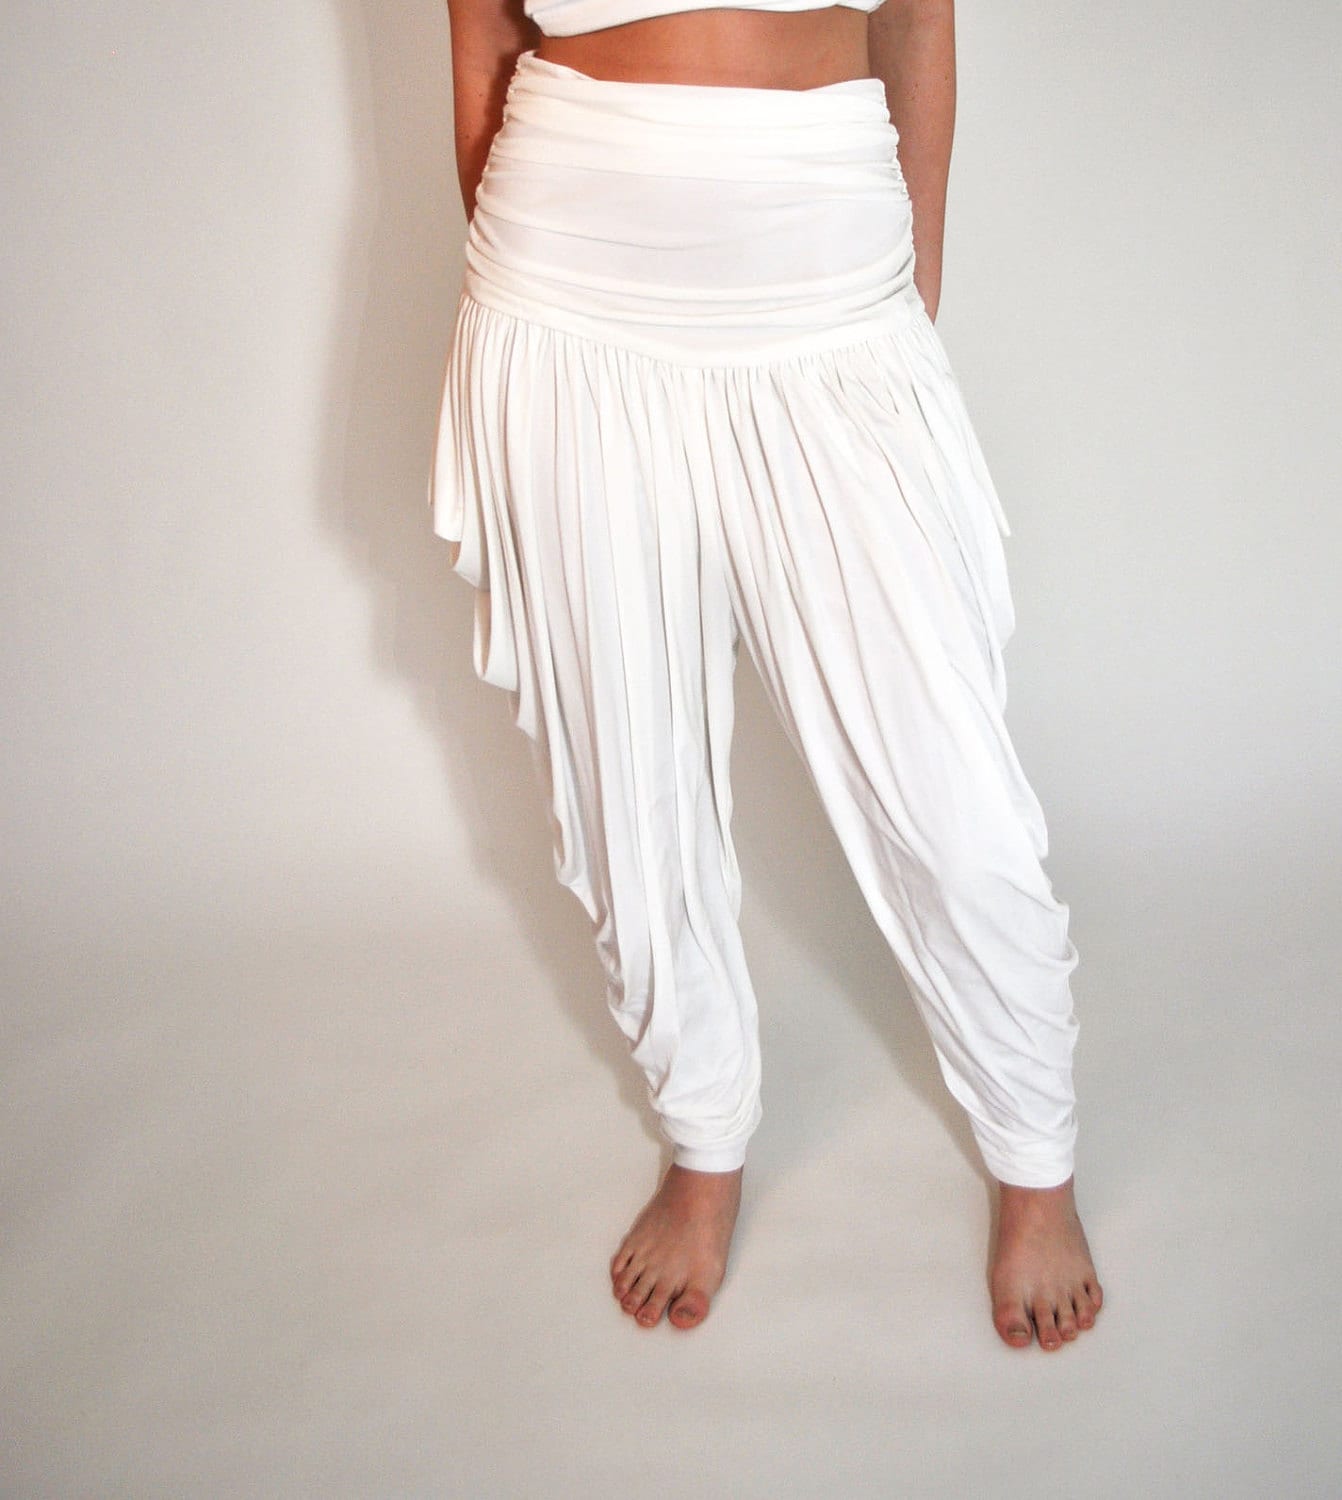 White Harem Pants 1980s Electra Casadei White Dressy by Continual